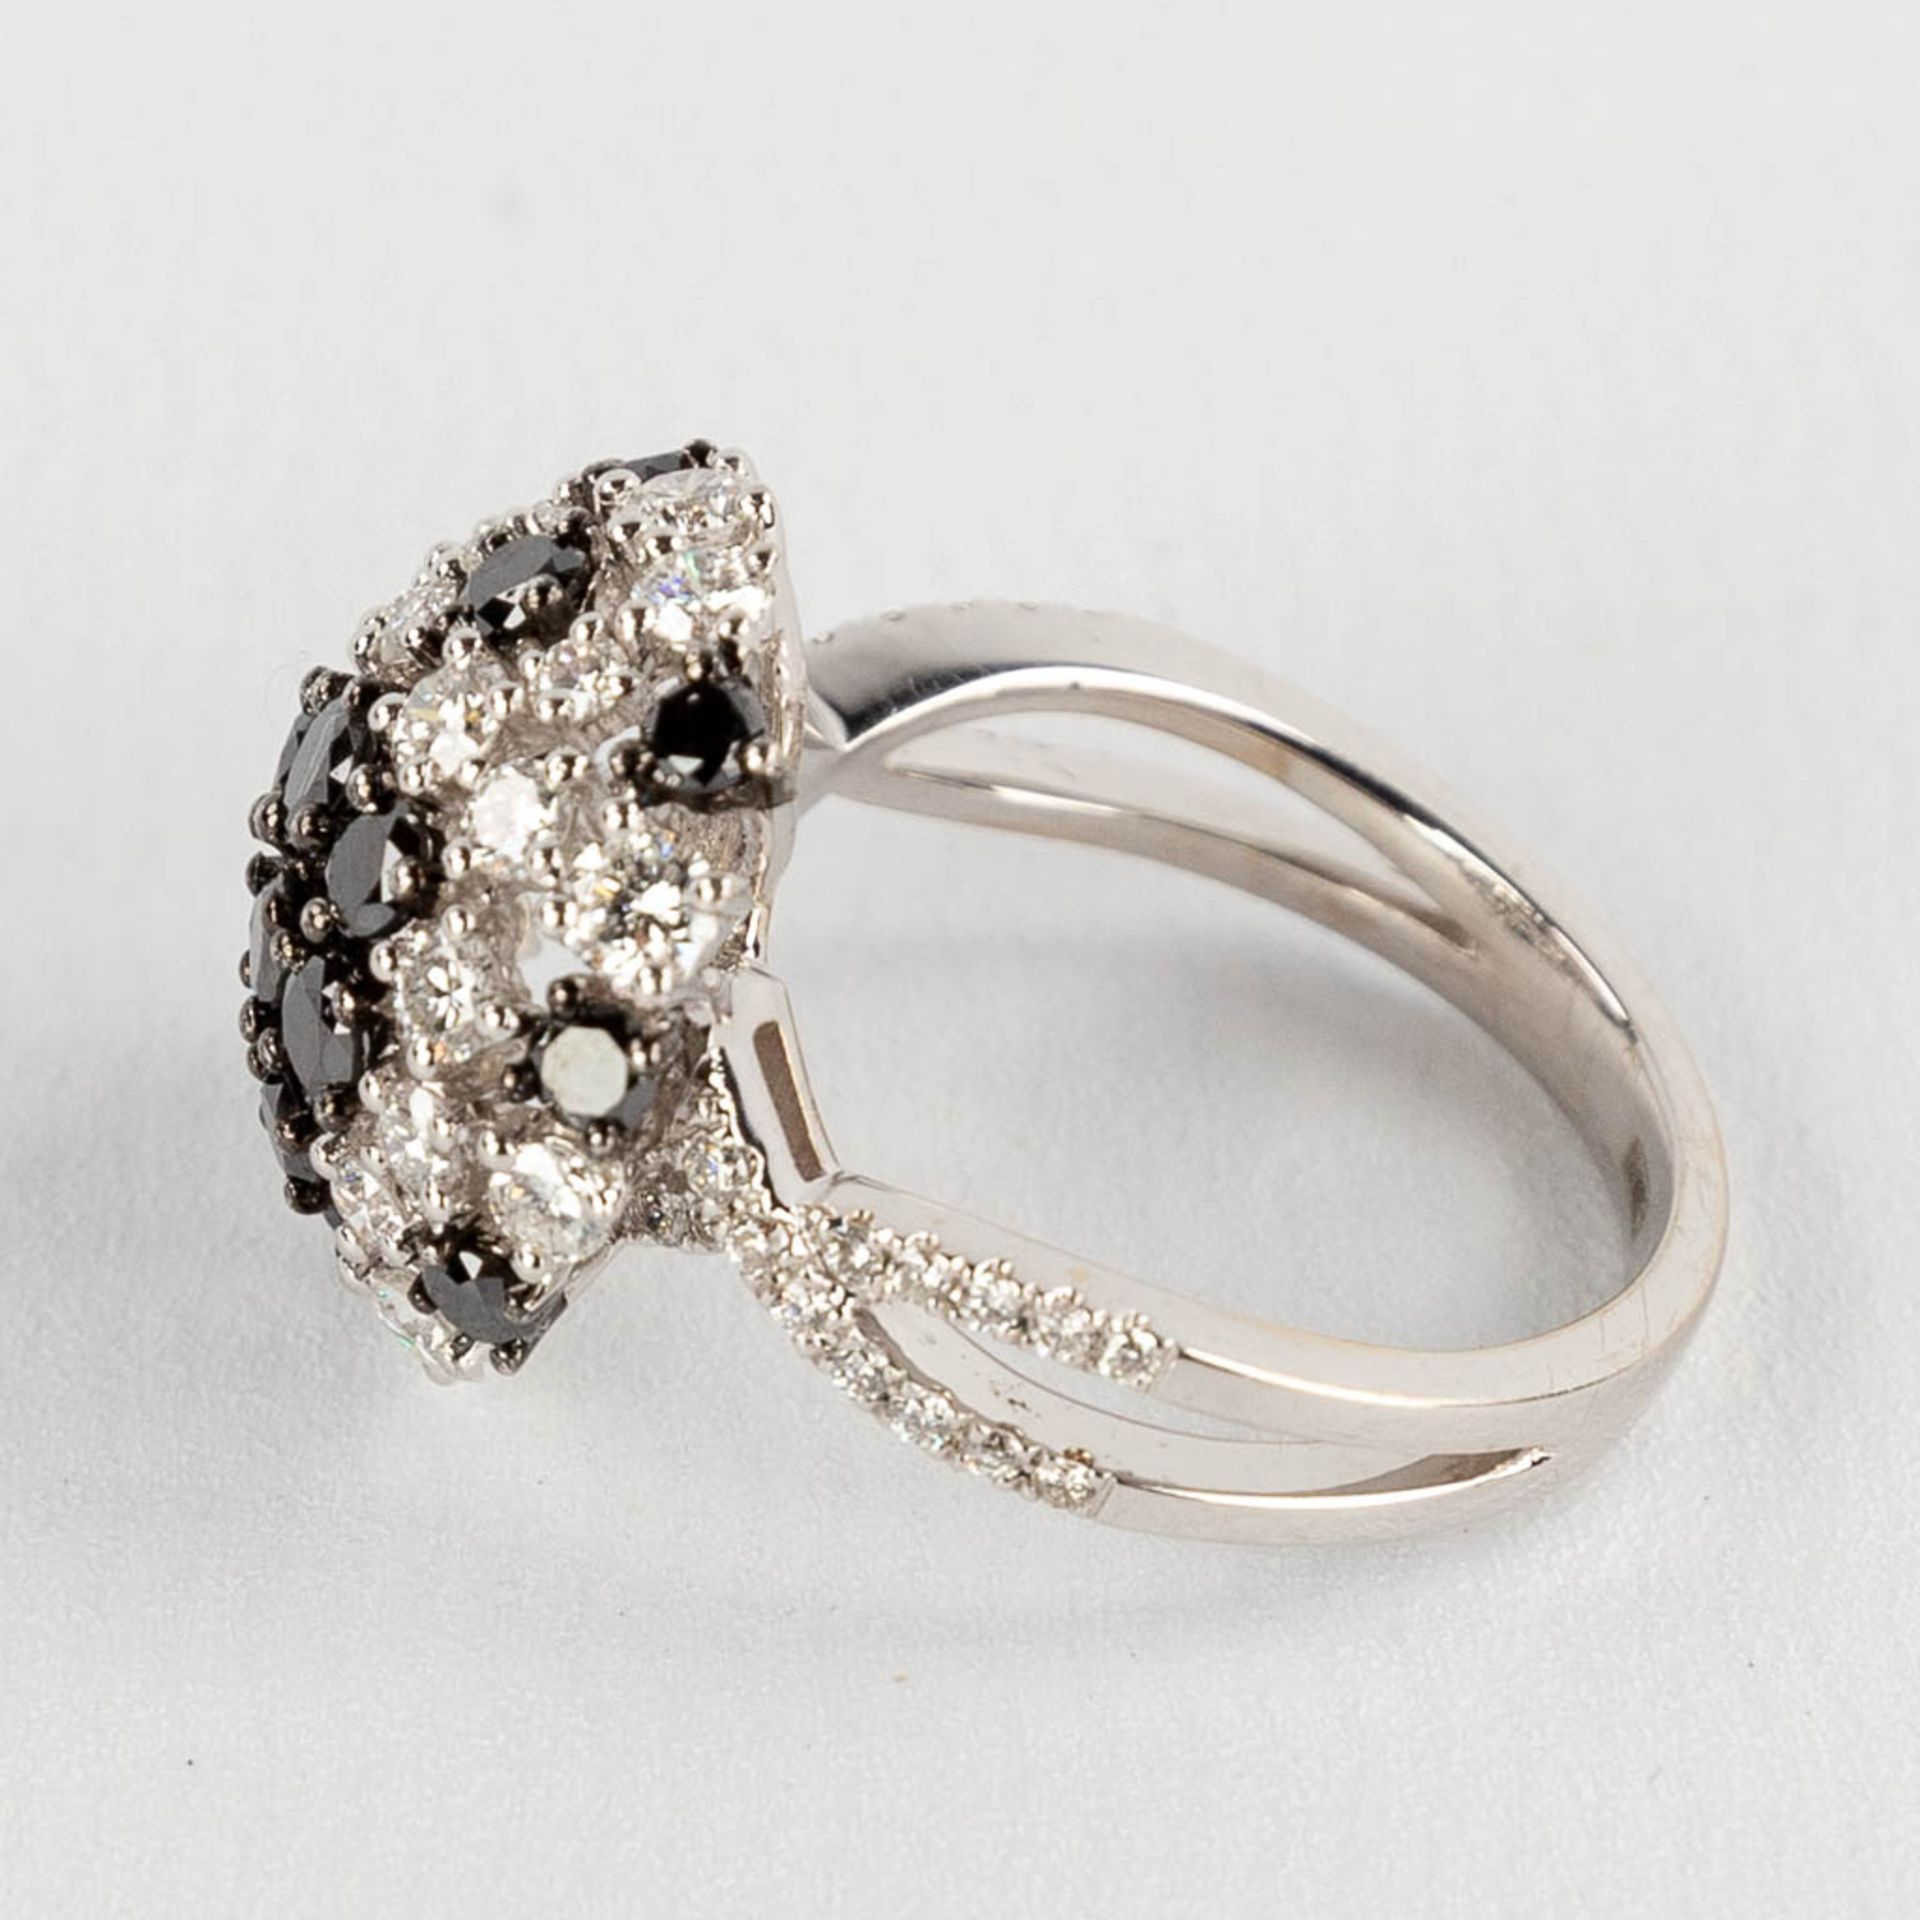 A ring, 18kt white gold with black and white diamonds, total approx. 1.81 ct. Ring size 54. - Image 6 of 10